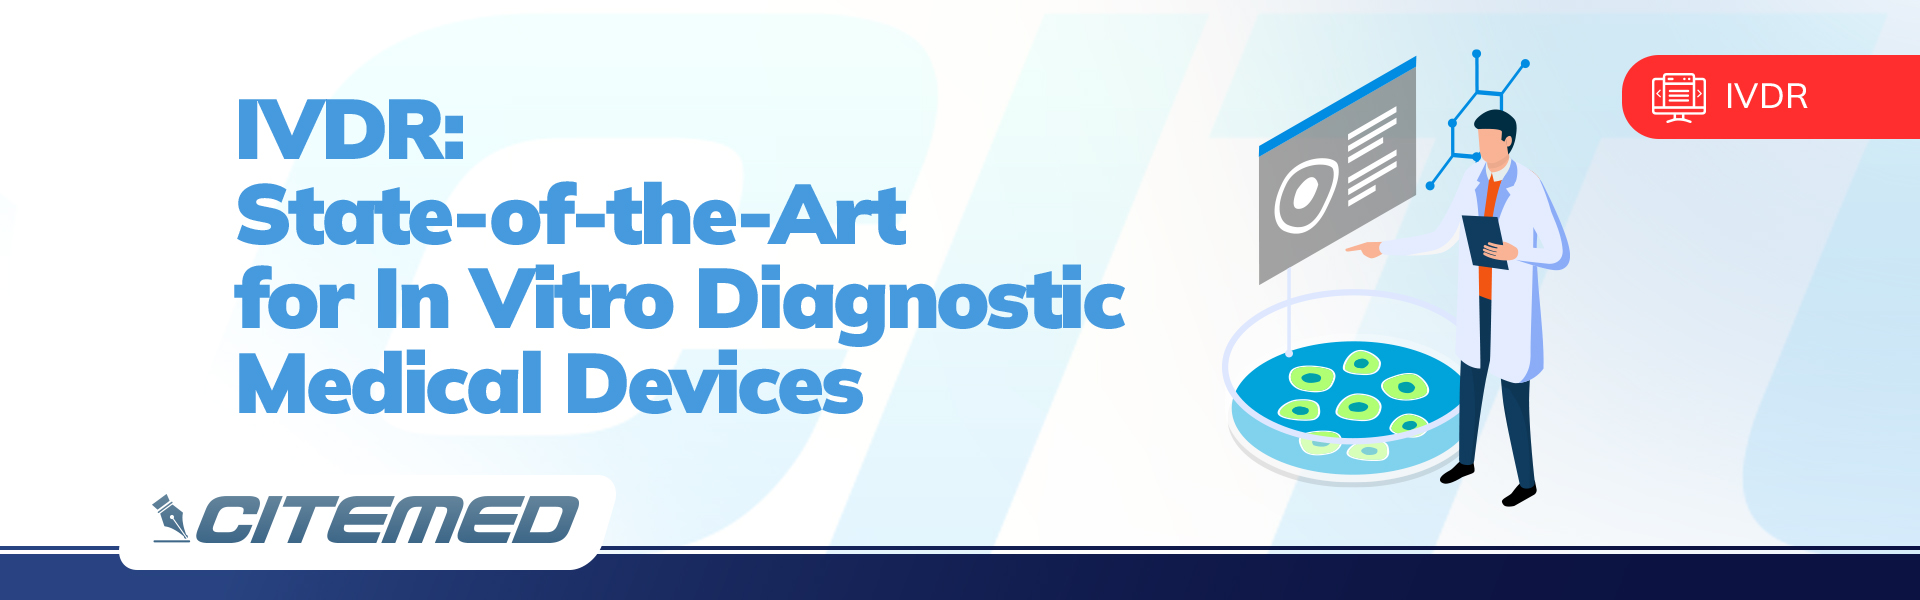 IVDR: State-of-the-Art for In Vitro Diagnostic Medical Devices